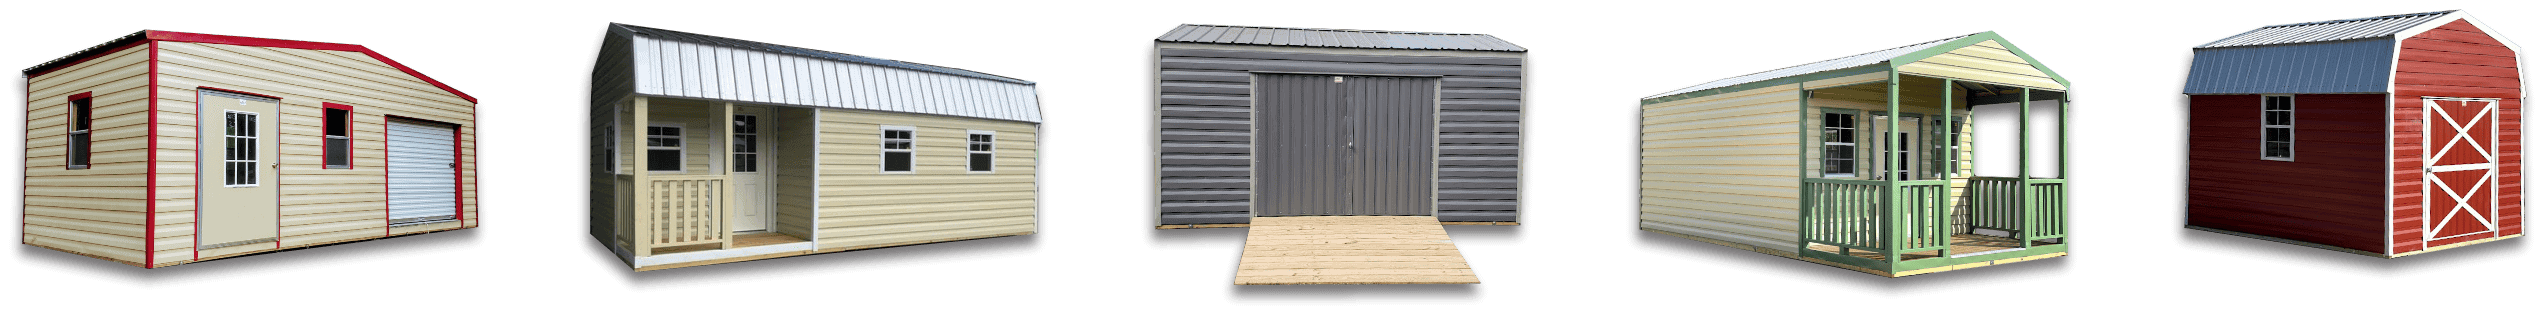 Shop our selection of high-quality 14x28 sheds for sale - portable buildings, storage sheds, and outdoor storage buildings available now from our trusted 14x28 shed dealer at RobinSheds.com. Explore our variety of stylish options to find the perfect 14x28 shed for your needs. Shed Styles.